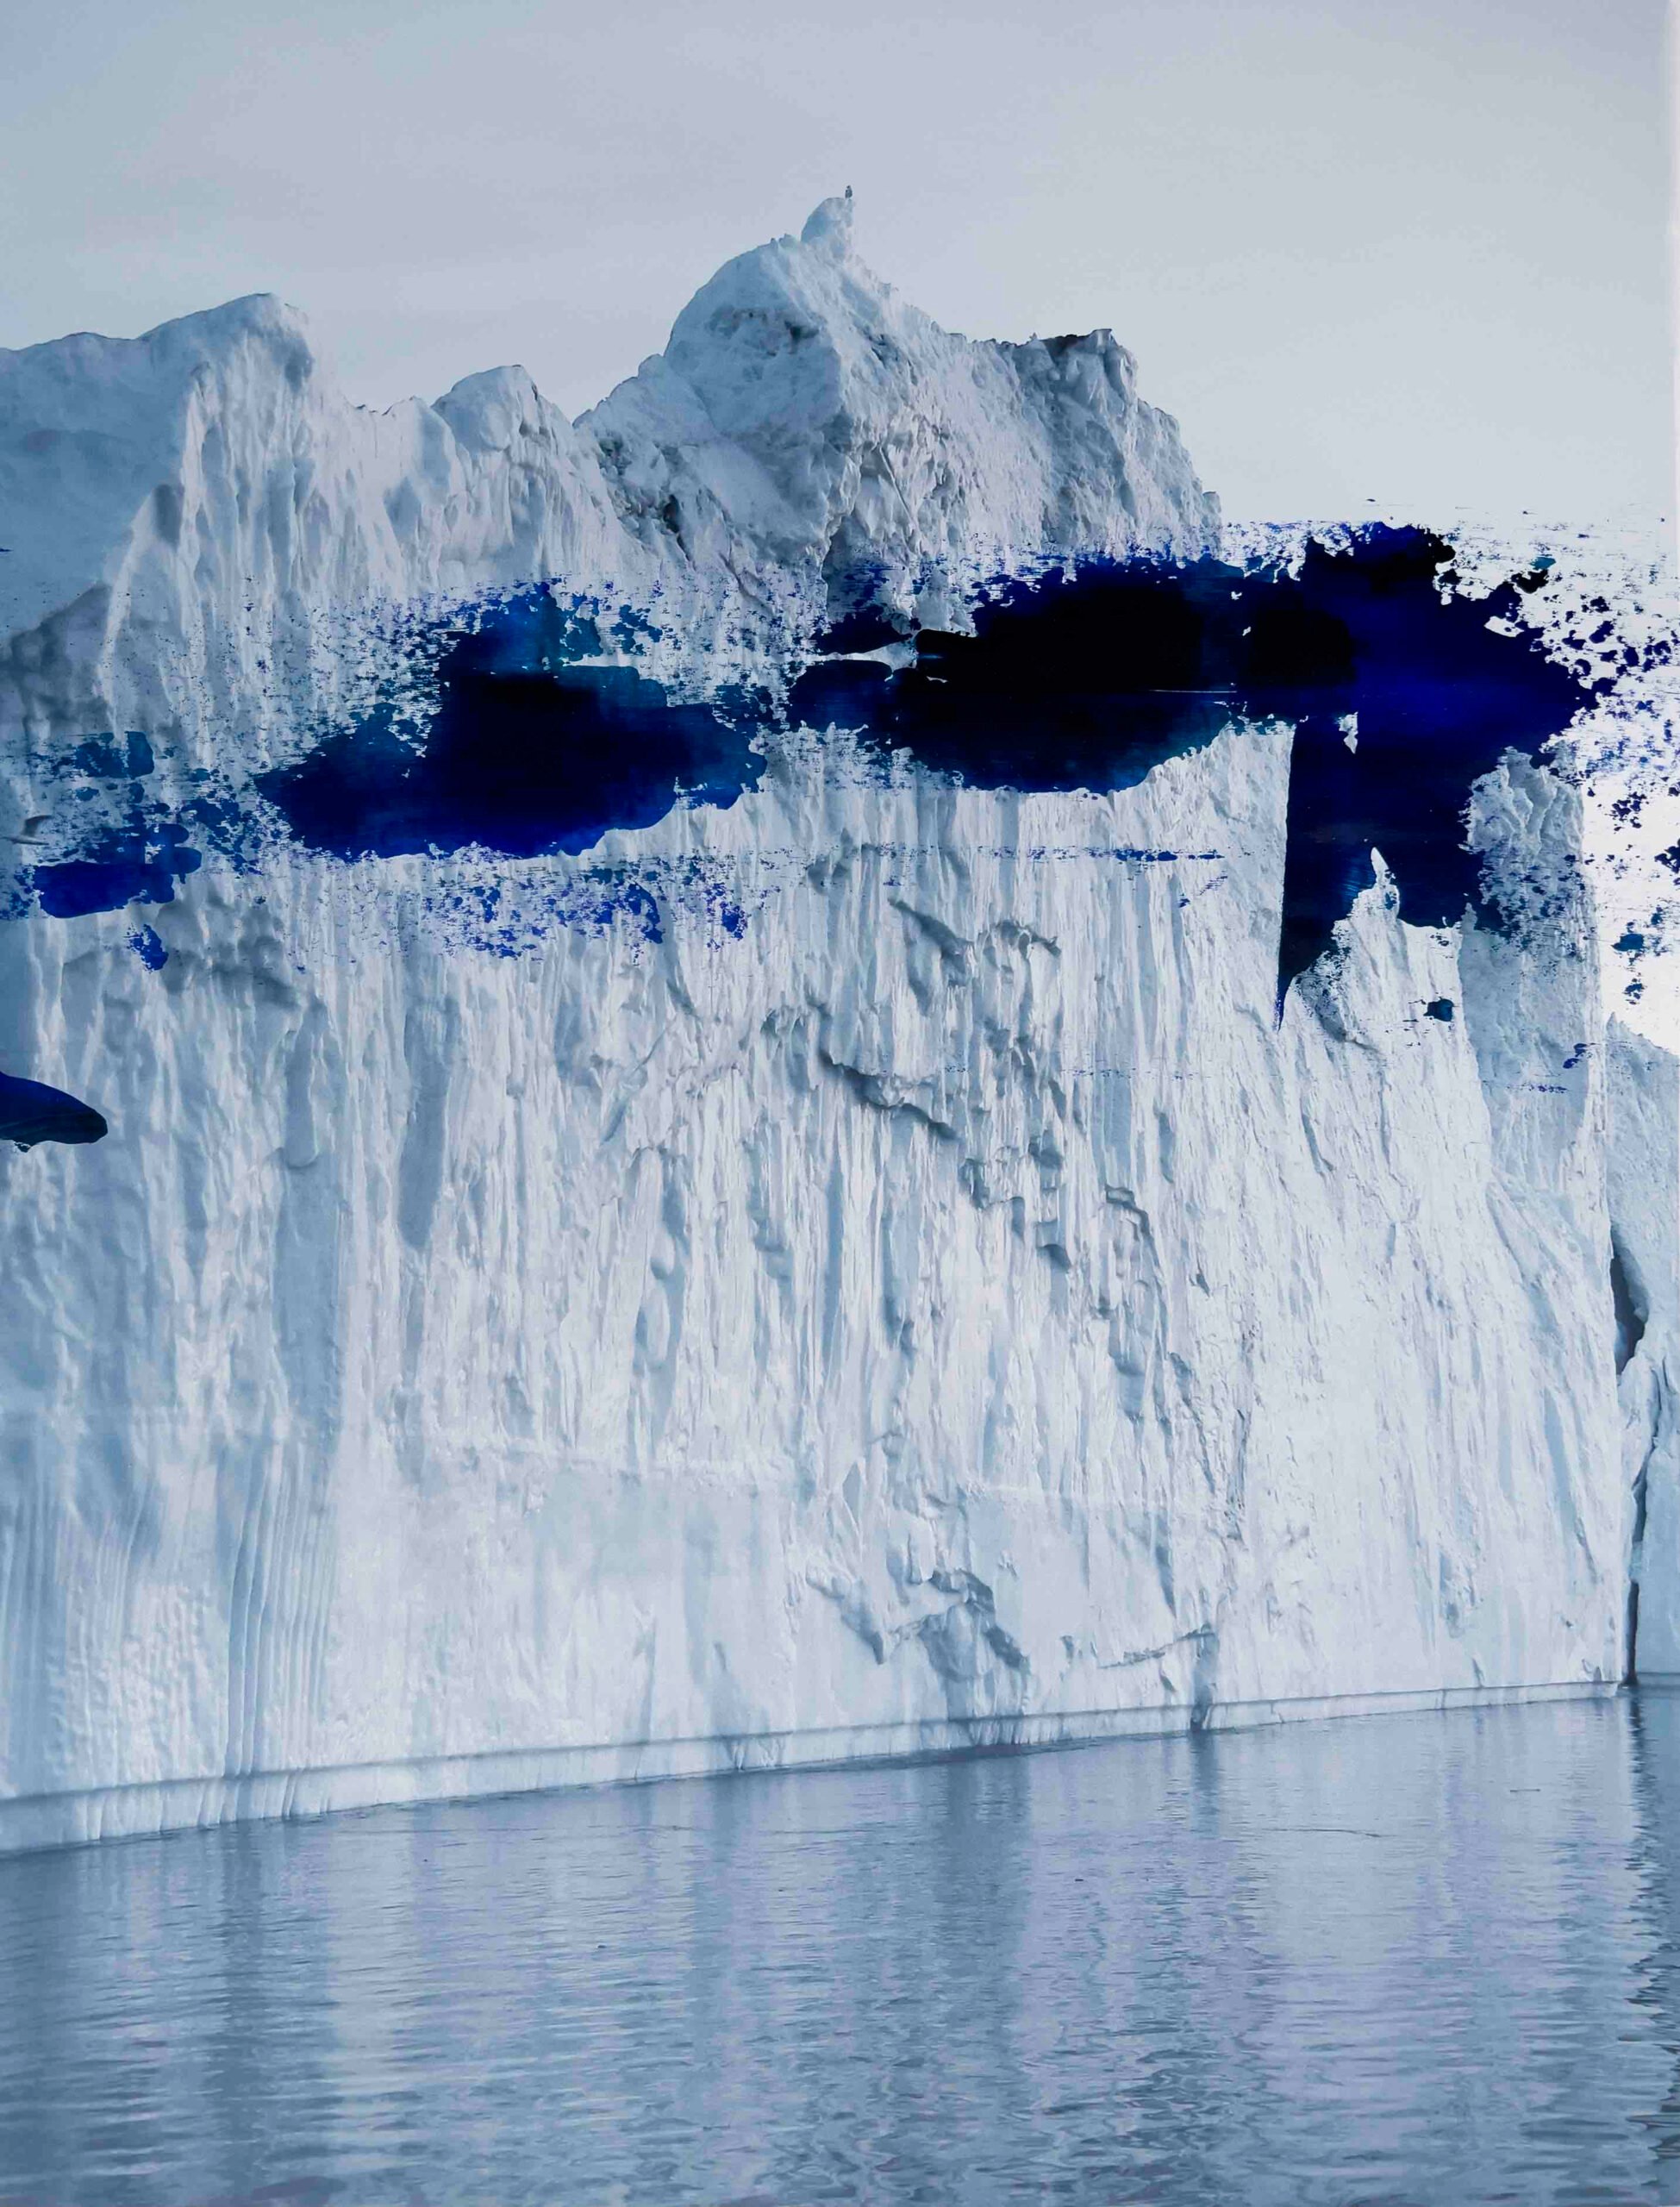 Olaf Wipperfürth – Disko Bay Photography and Paintings